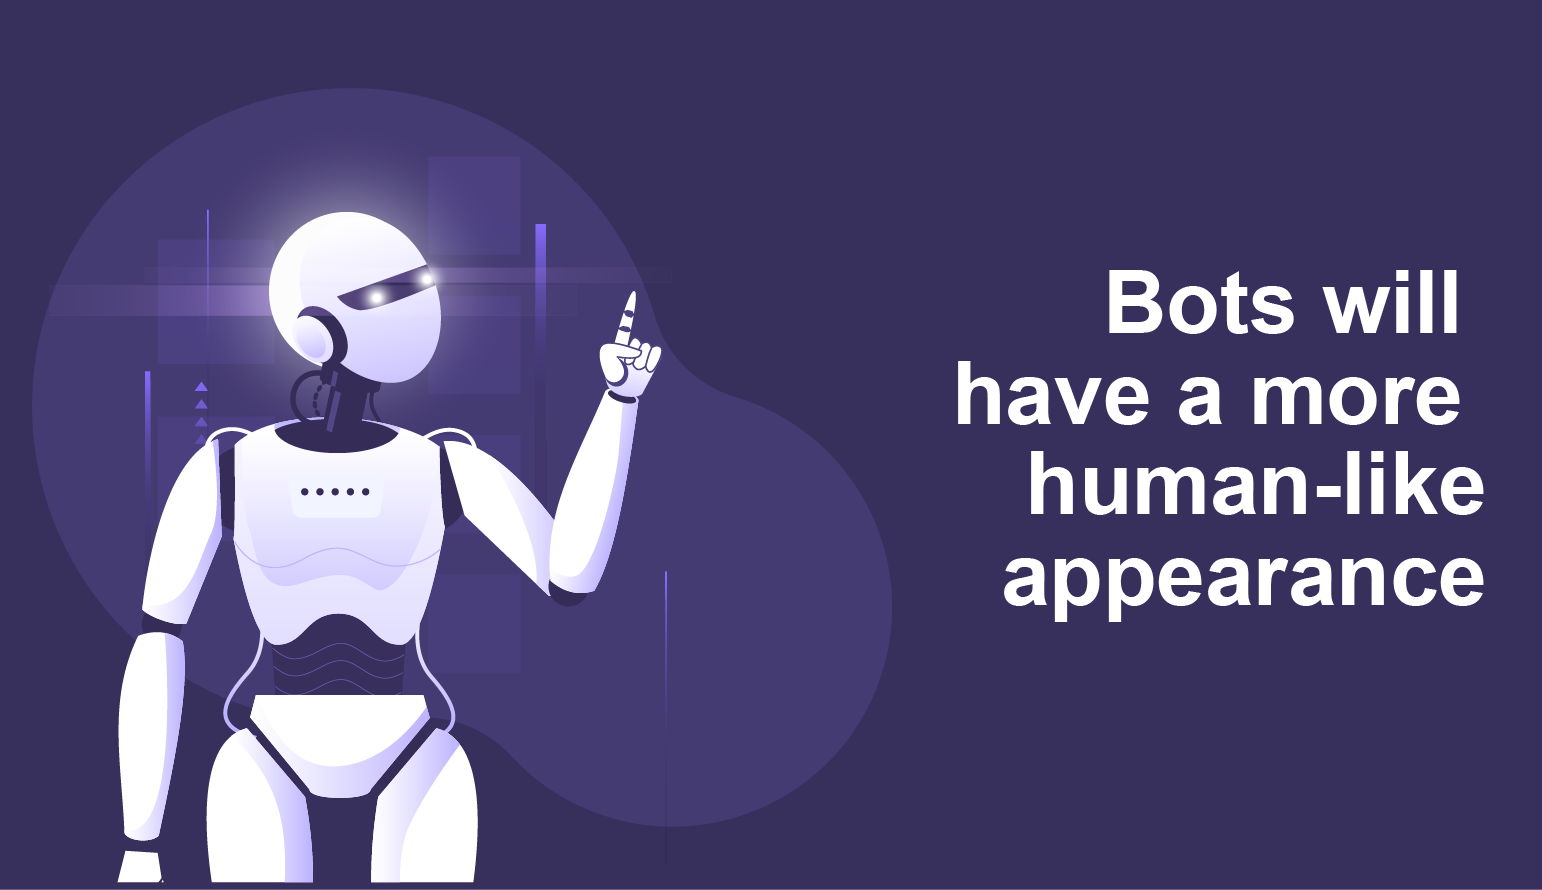 Bots will have a more human-like appearance